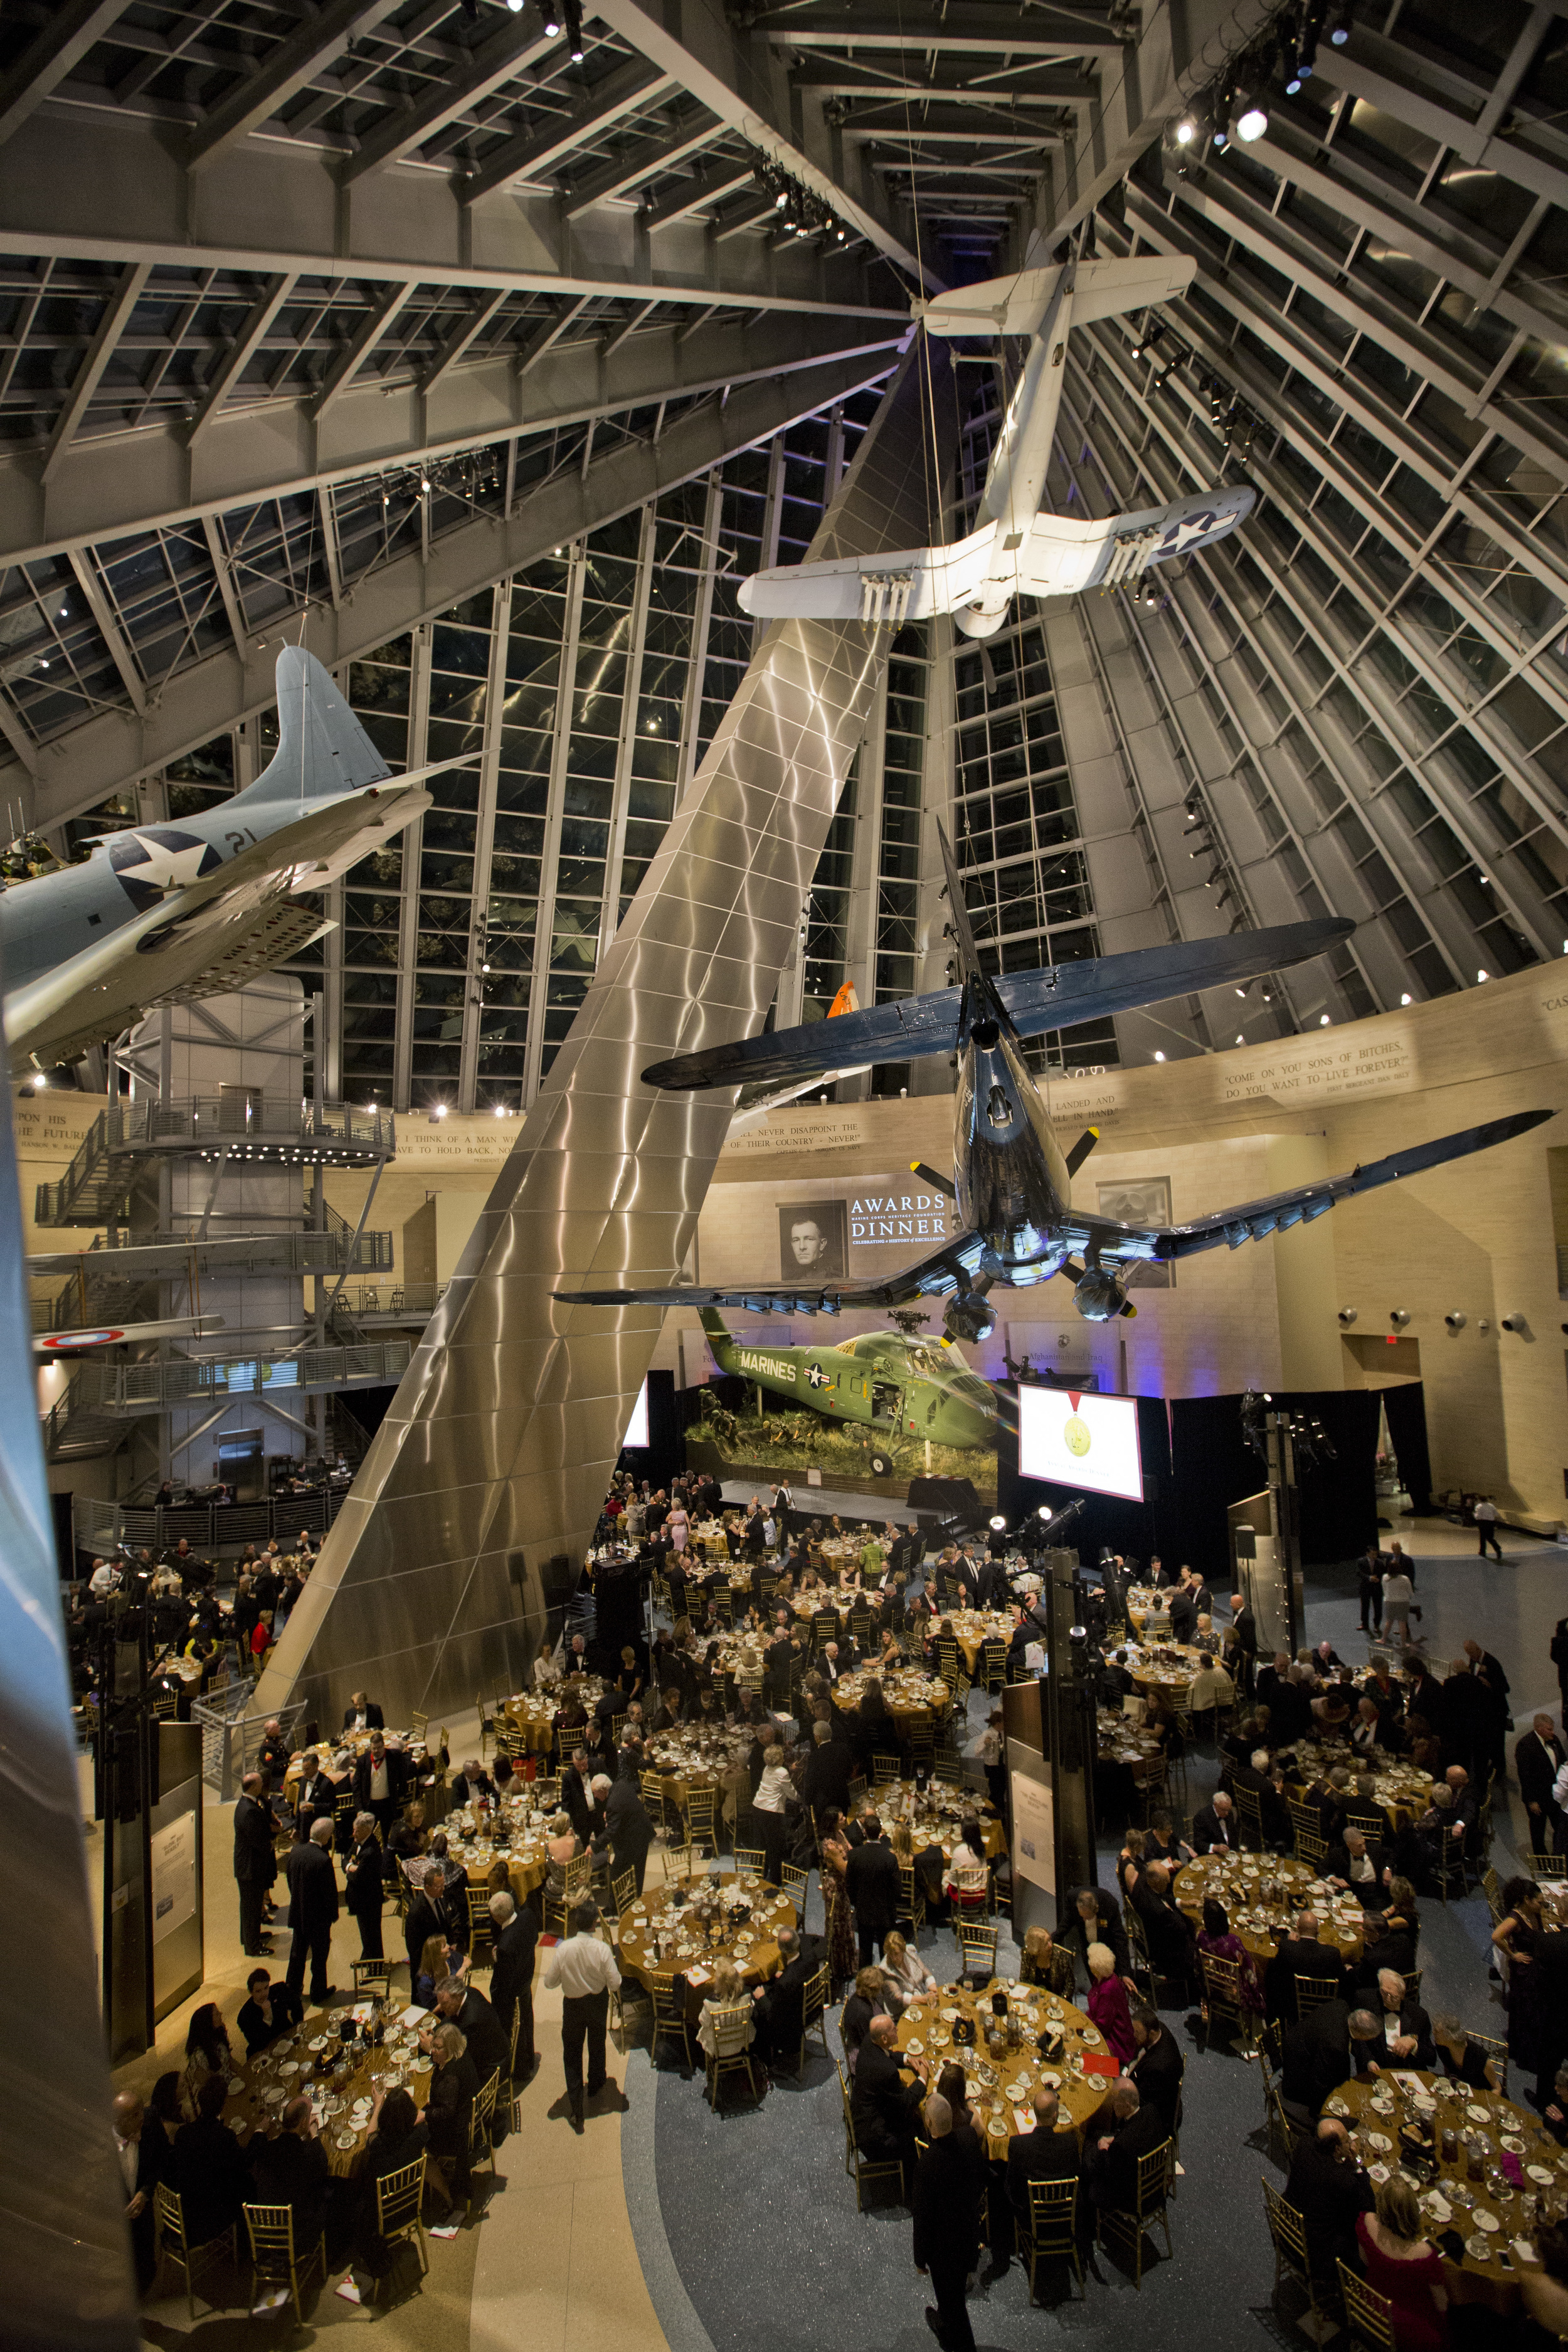  35th Annual Awards dinner at the National Museum of the Marine Corps 